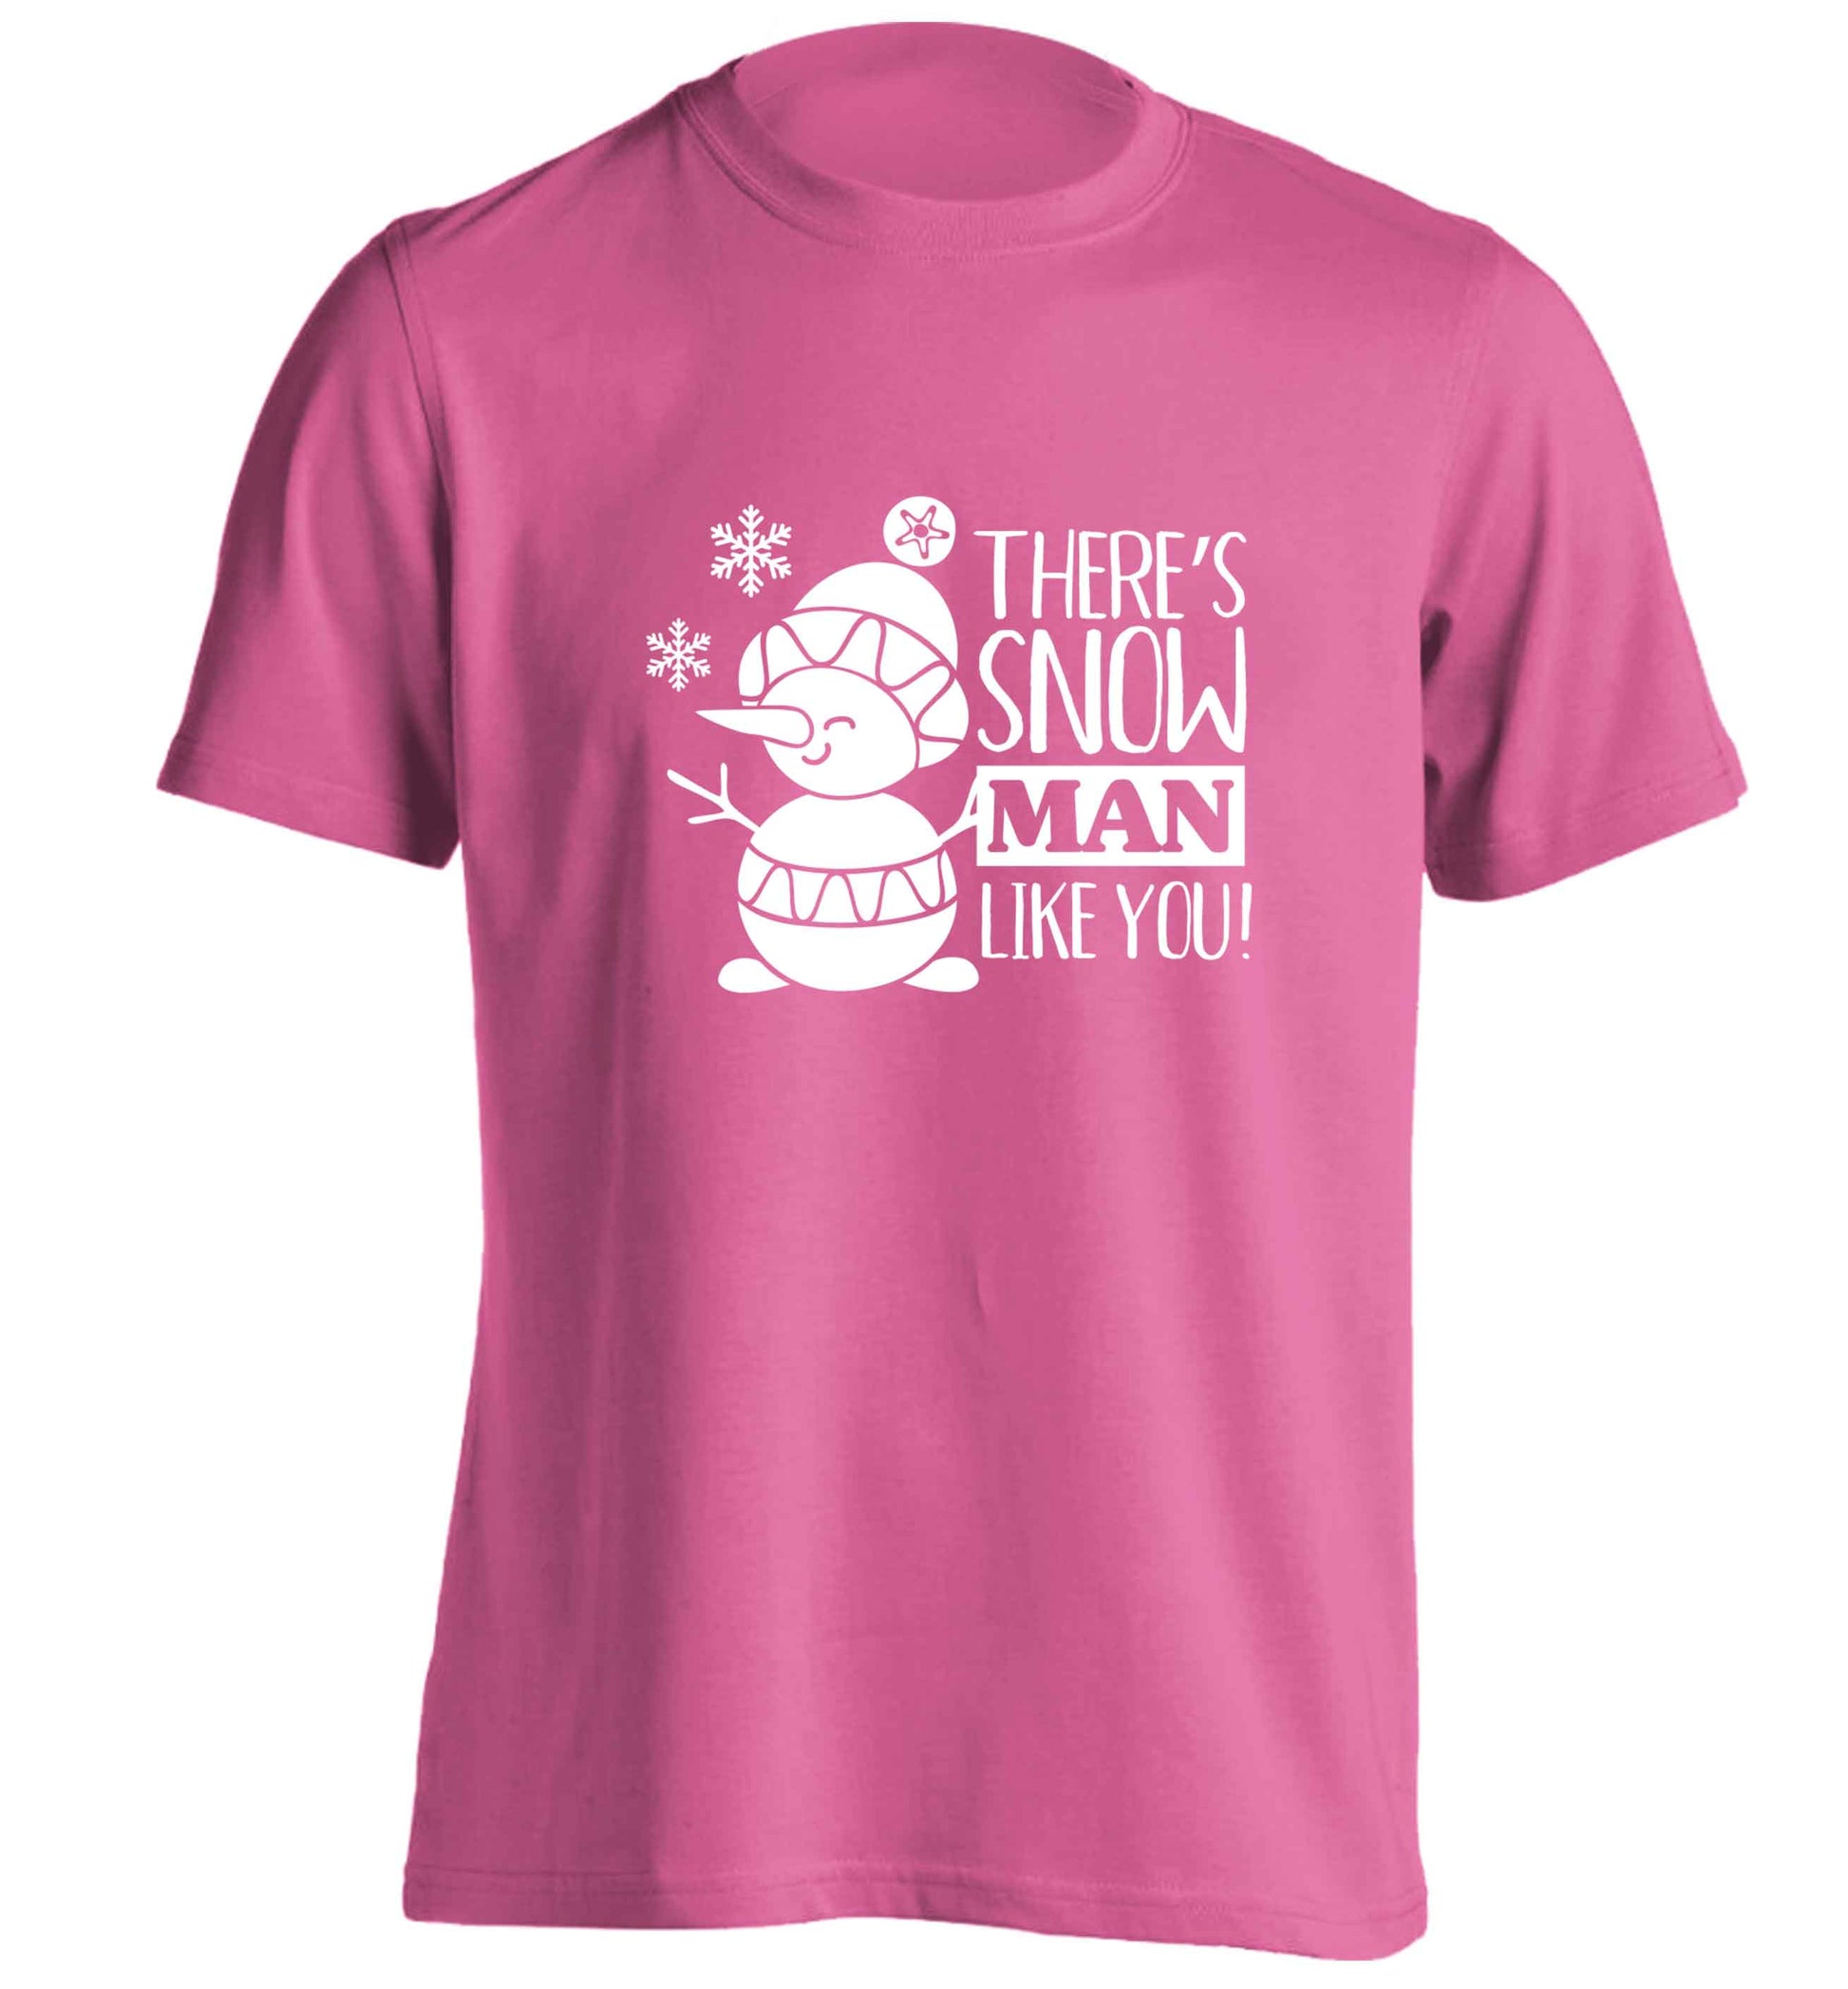 There's snow man like you adults unisex pink Tshirt 2XL